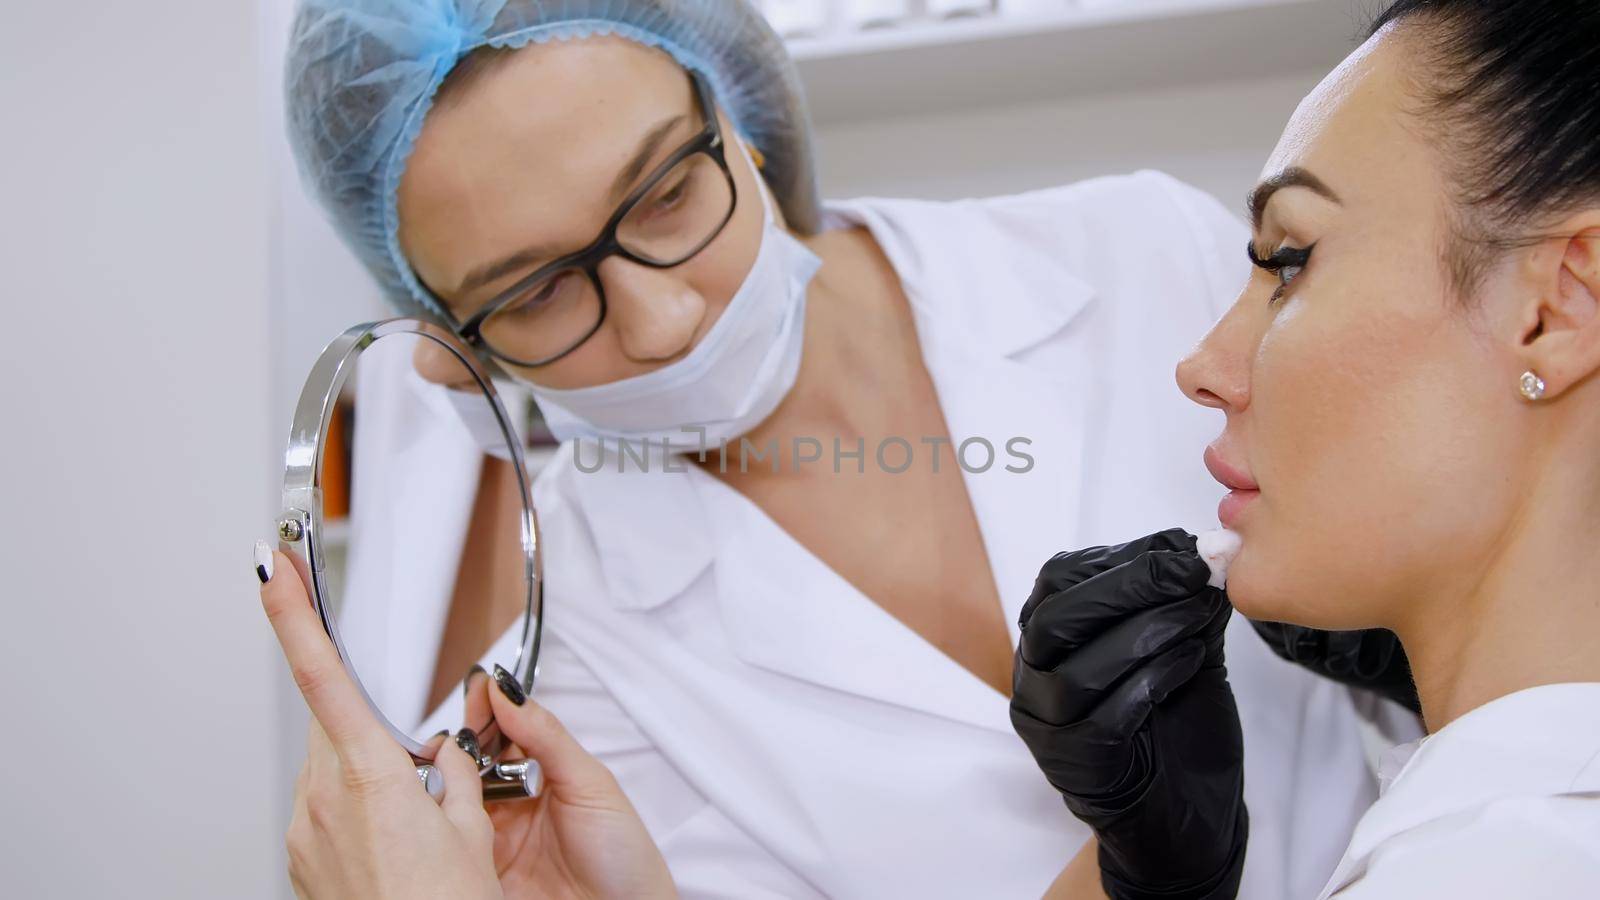 medical office, beautiful woman looking in the mirror, doctor wipes patient lips with a sterile napkin, before injections of hyaluronic acid into lips, cleans the surface with an antiseptic. High quality photo